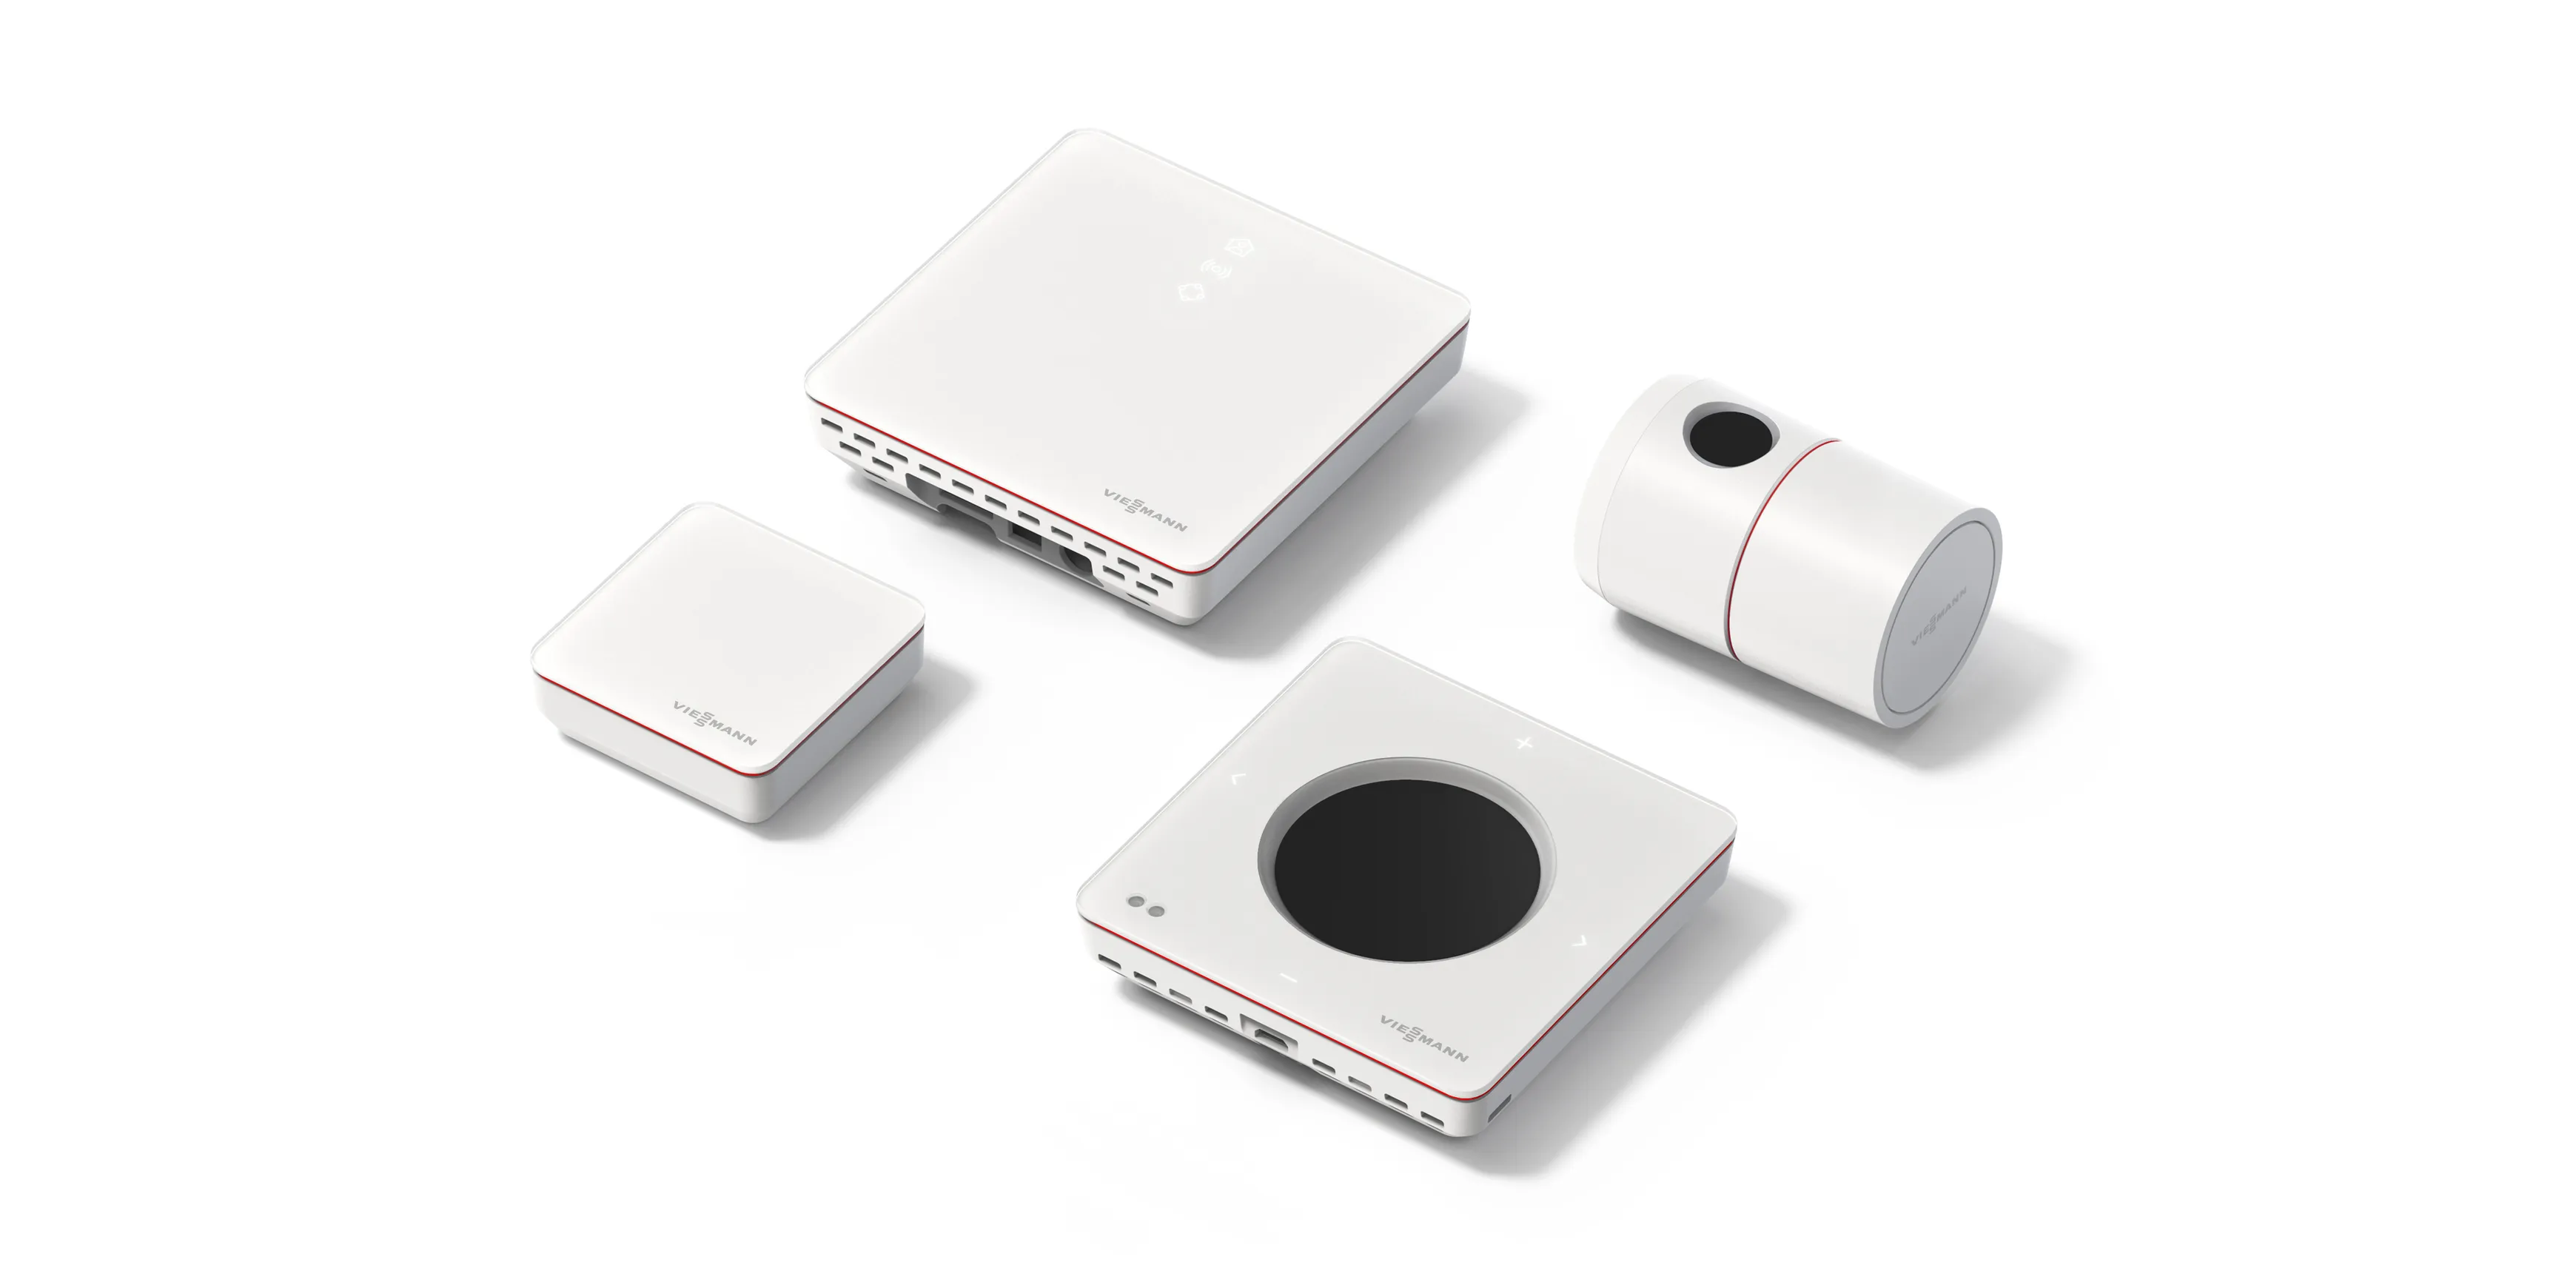 The Viessmann ViCare smart heating portfolio laying on a white surface